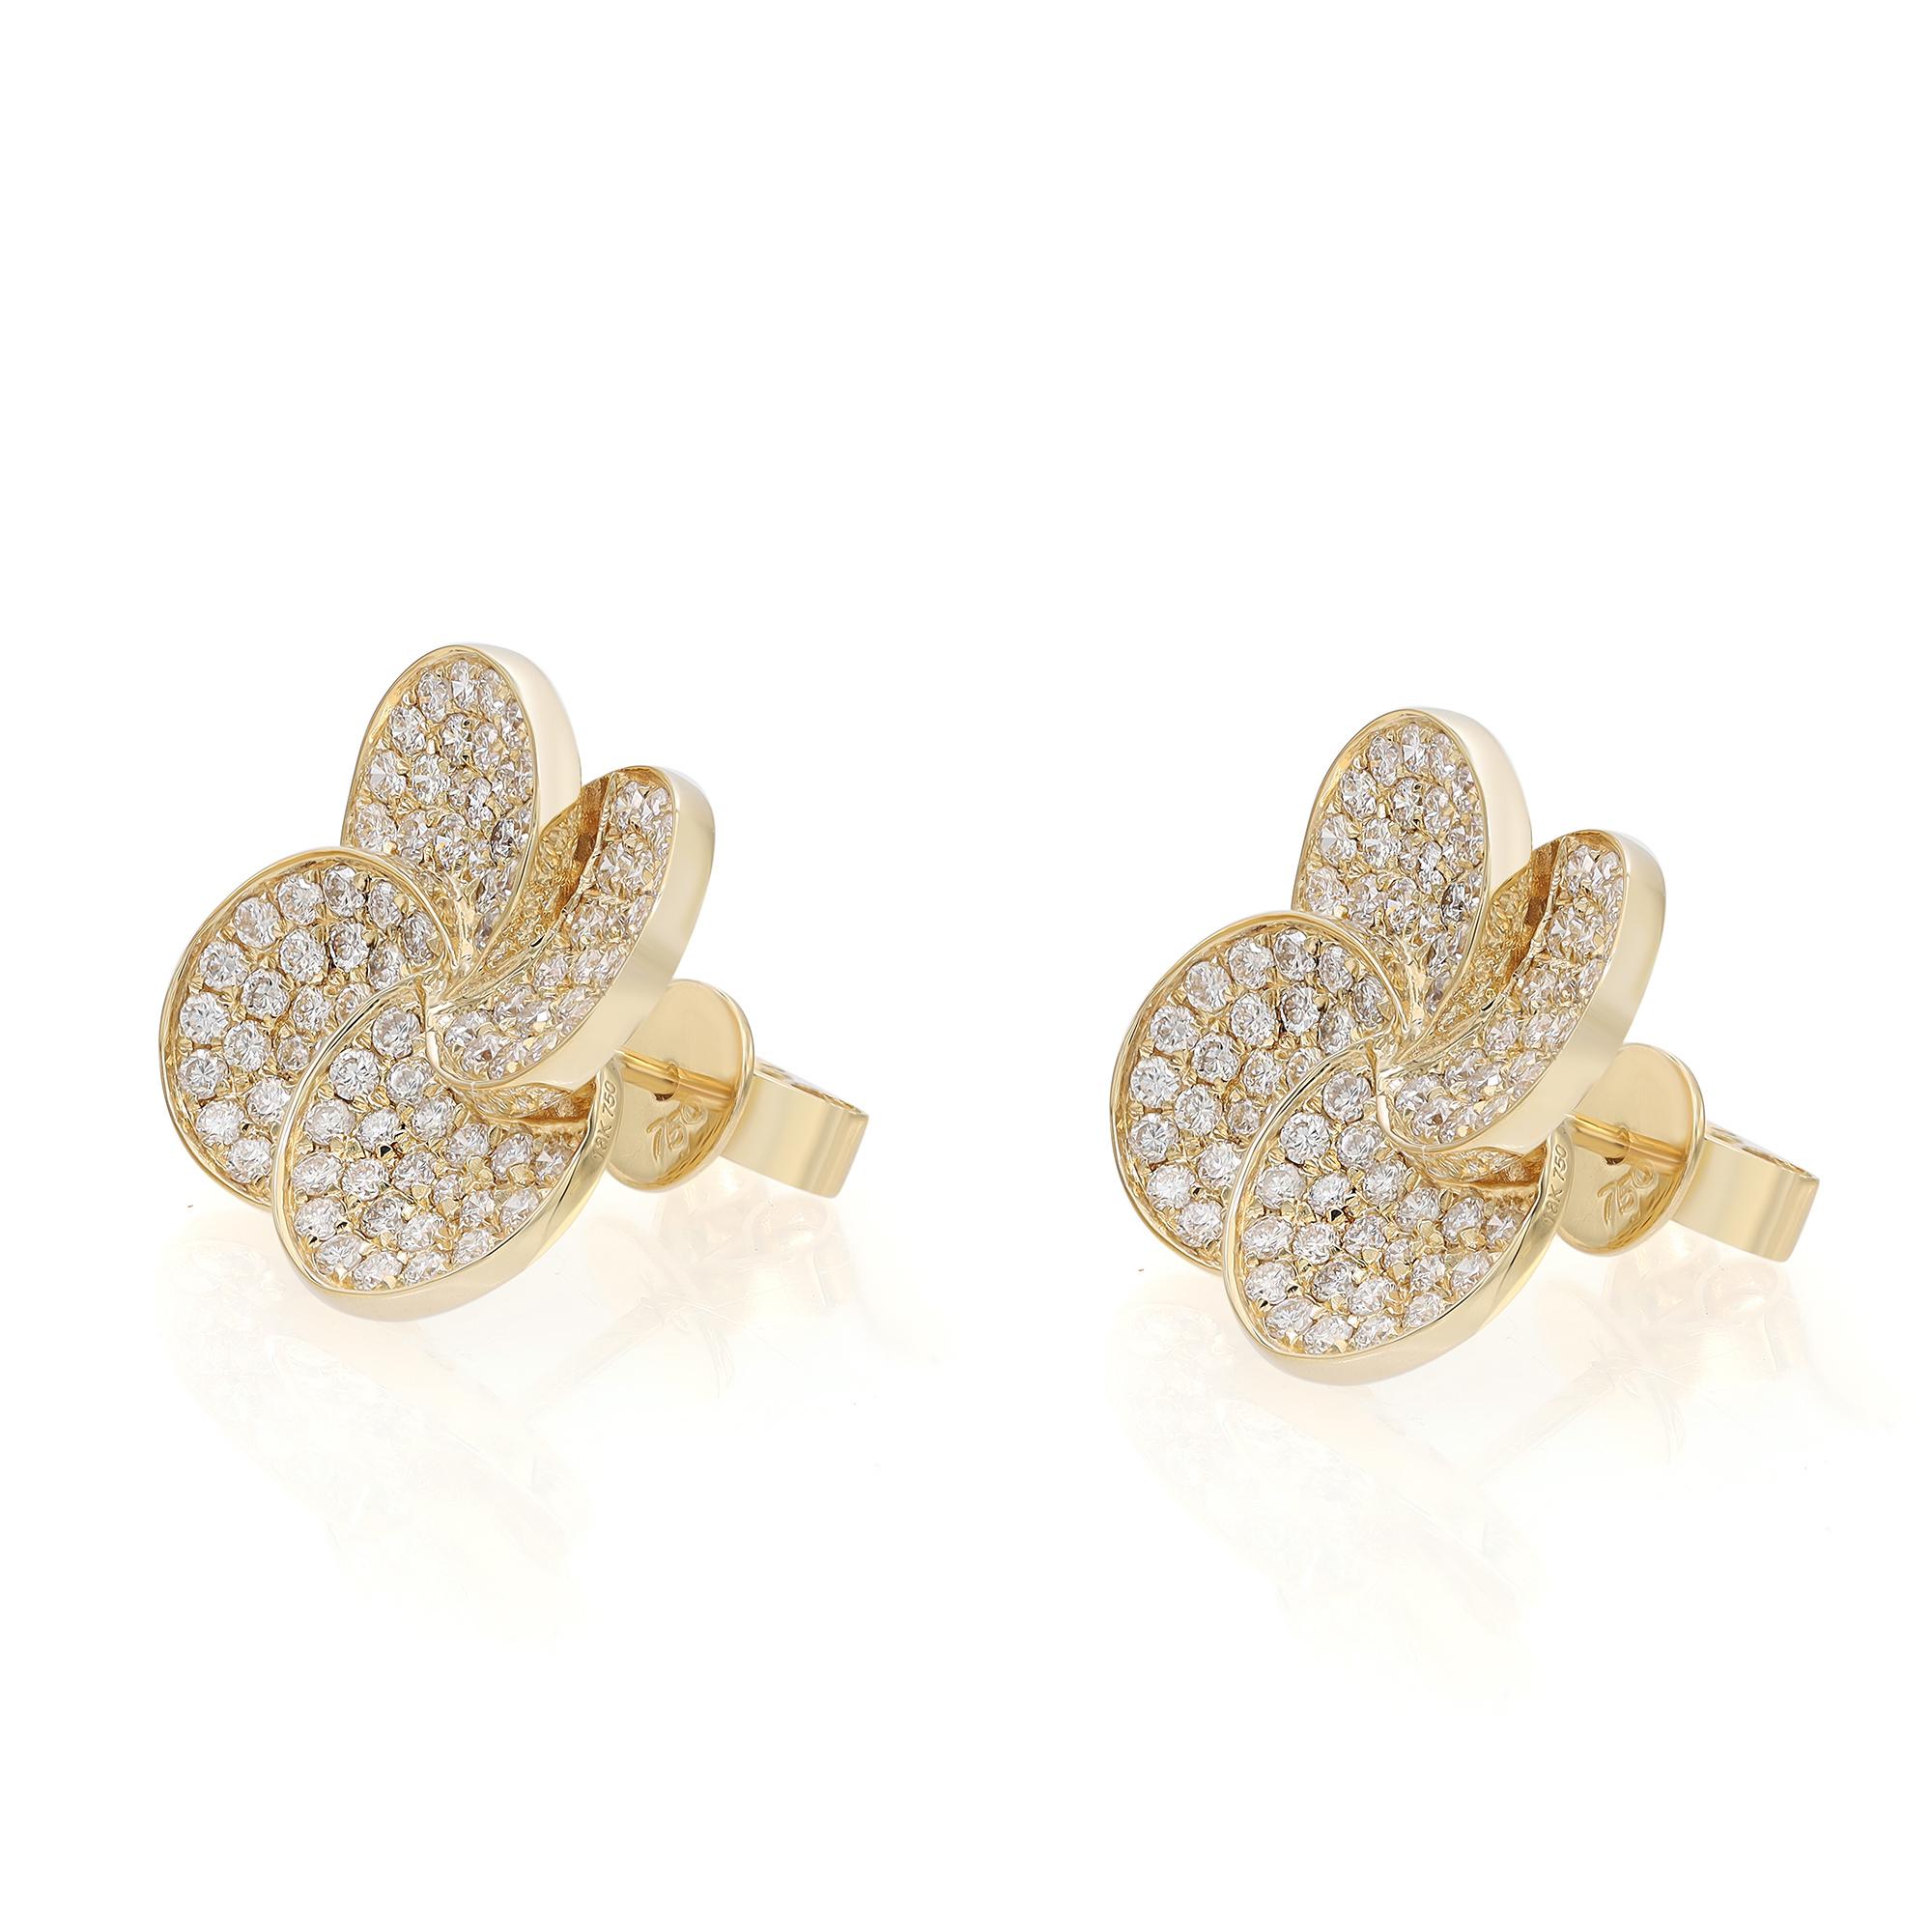 Diamonds in full bloom. These stunning diamond flower stud earrings are crafted in 18k yellow gold. Showcases pave set round brilliant cut diamonds weighing 1.45 carats. Diamond quality: color G-H and clarity VS-SI. Earring size: 14mm x 14mm. Total